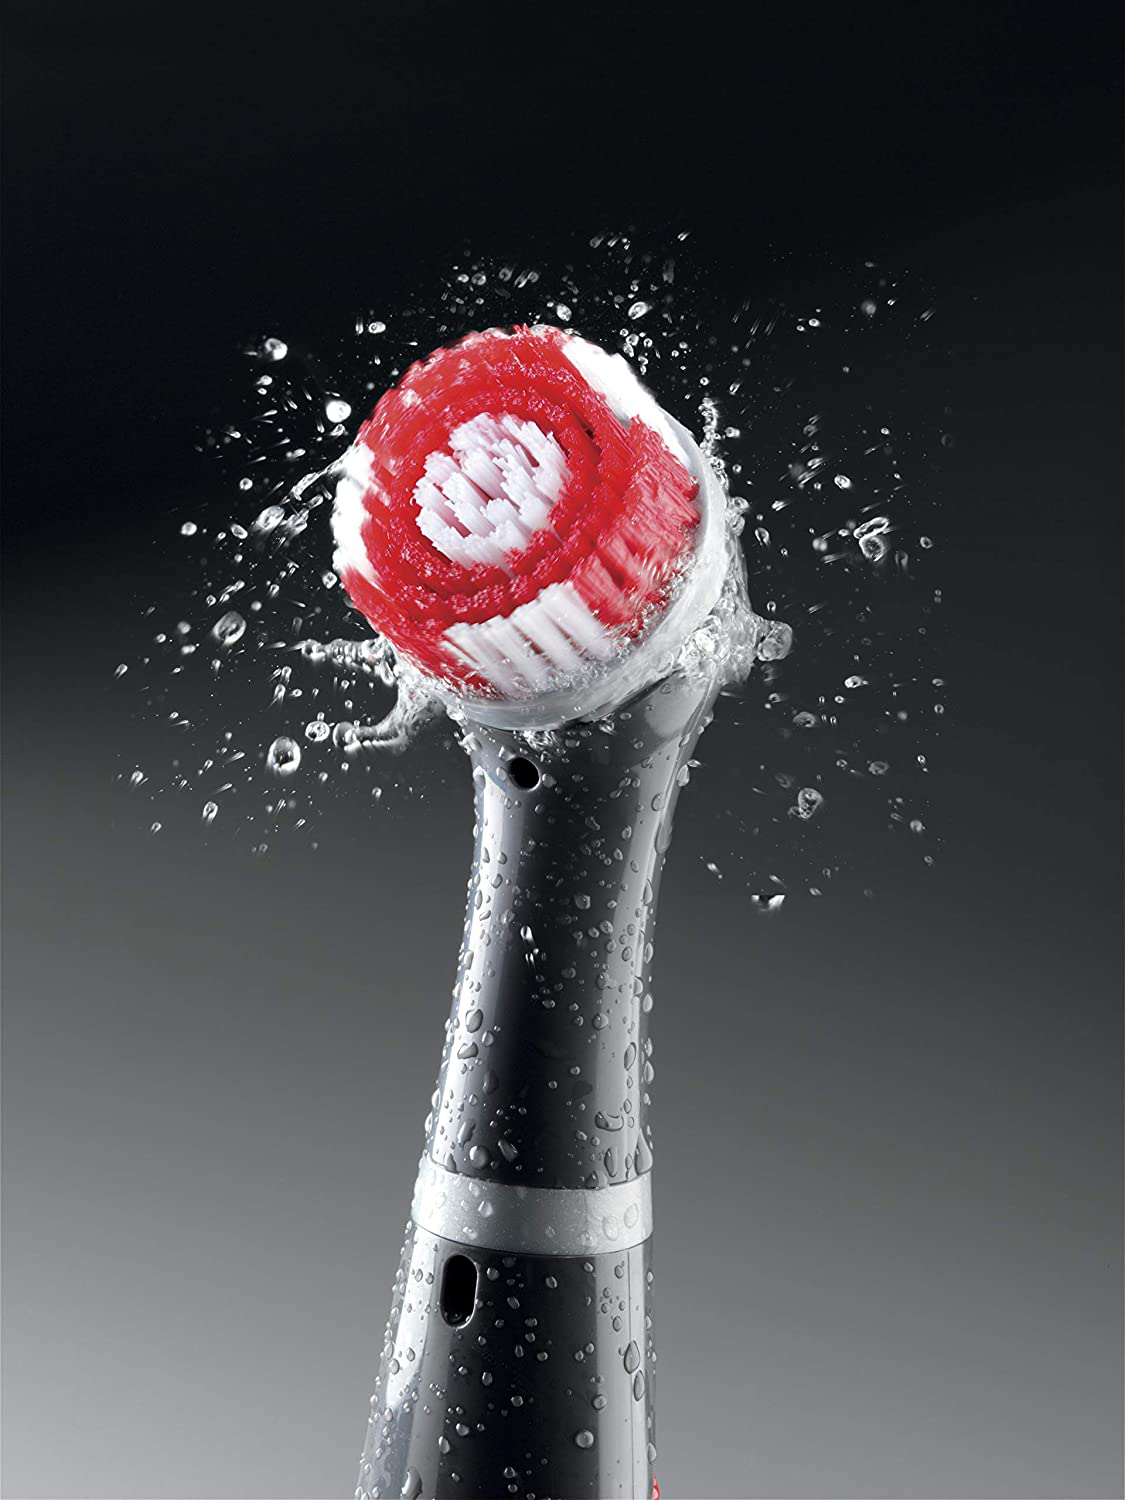 Rubbermaid Power Scrubber, Grout & Tile Bathroom Cleaner, Shower Cleaner,  and Bathtub Cleaner, Multi-Purpose Scrub Brush